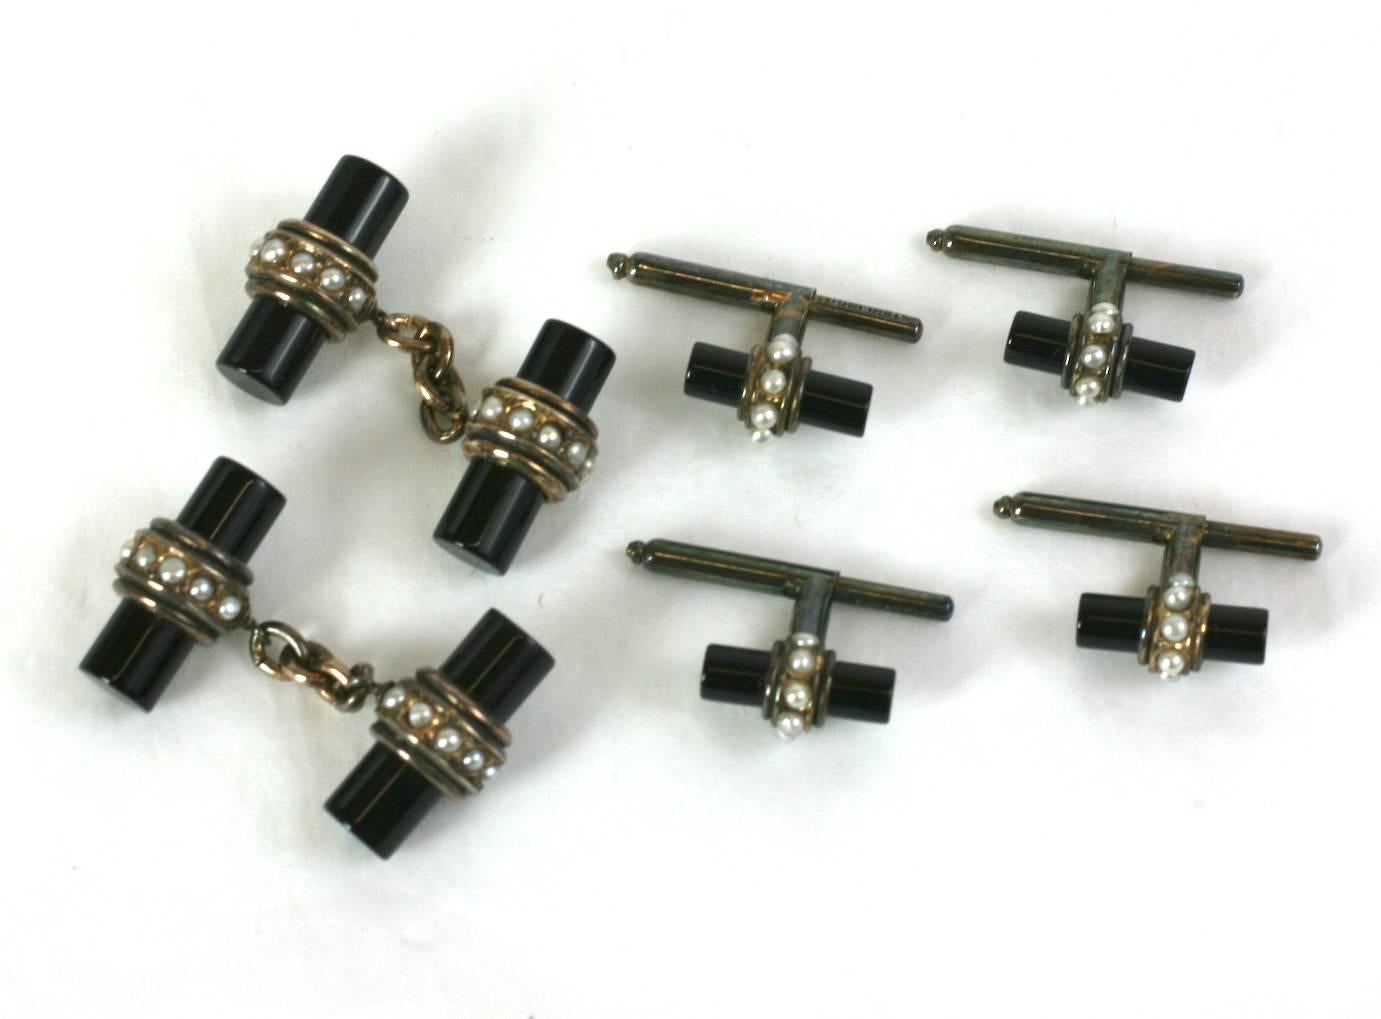 Art Deco Onyx and Pearl Stud Set set in sterling silver. Elegant toggle formed onyx tubes are held in a setting of natural half pearls. 4 matching shirt studs are included. 1920's USA. Marked 